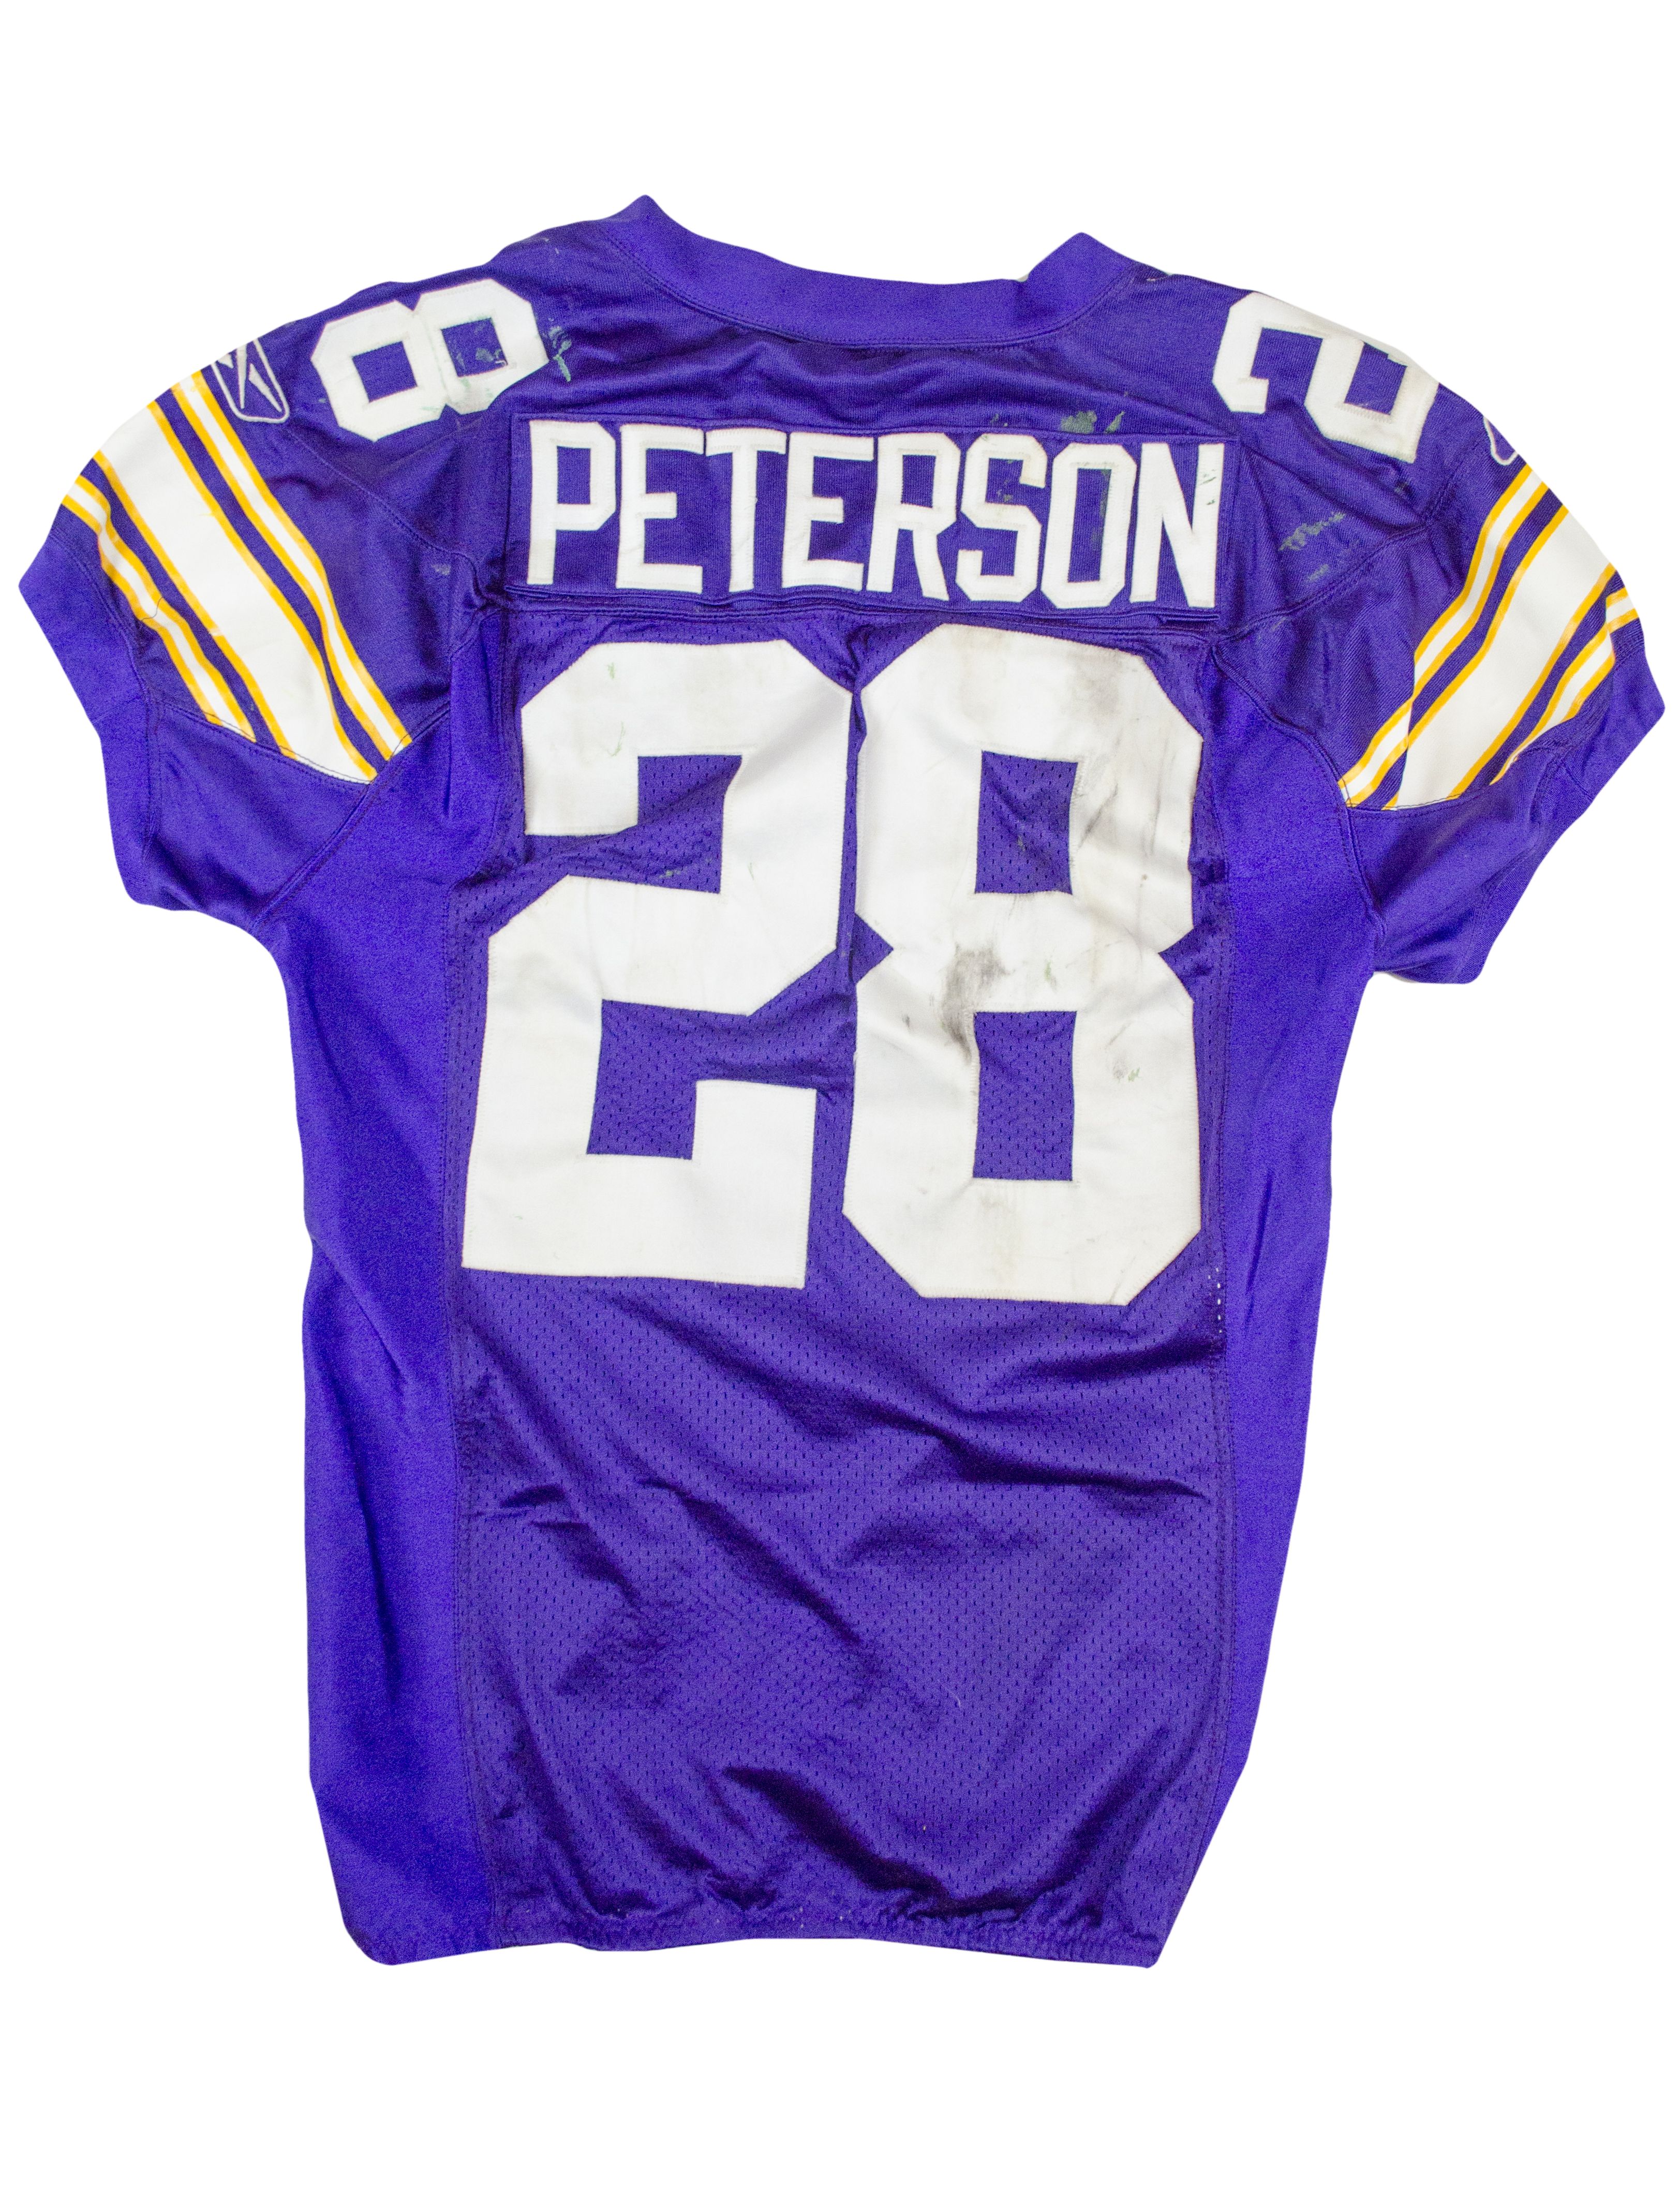 Retro Nfl Jerseys Make Awesome Gifts 6077a lg